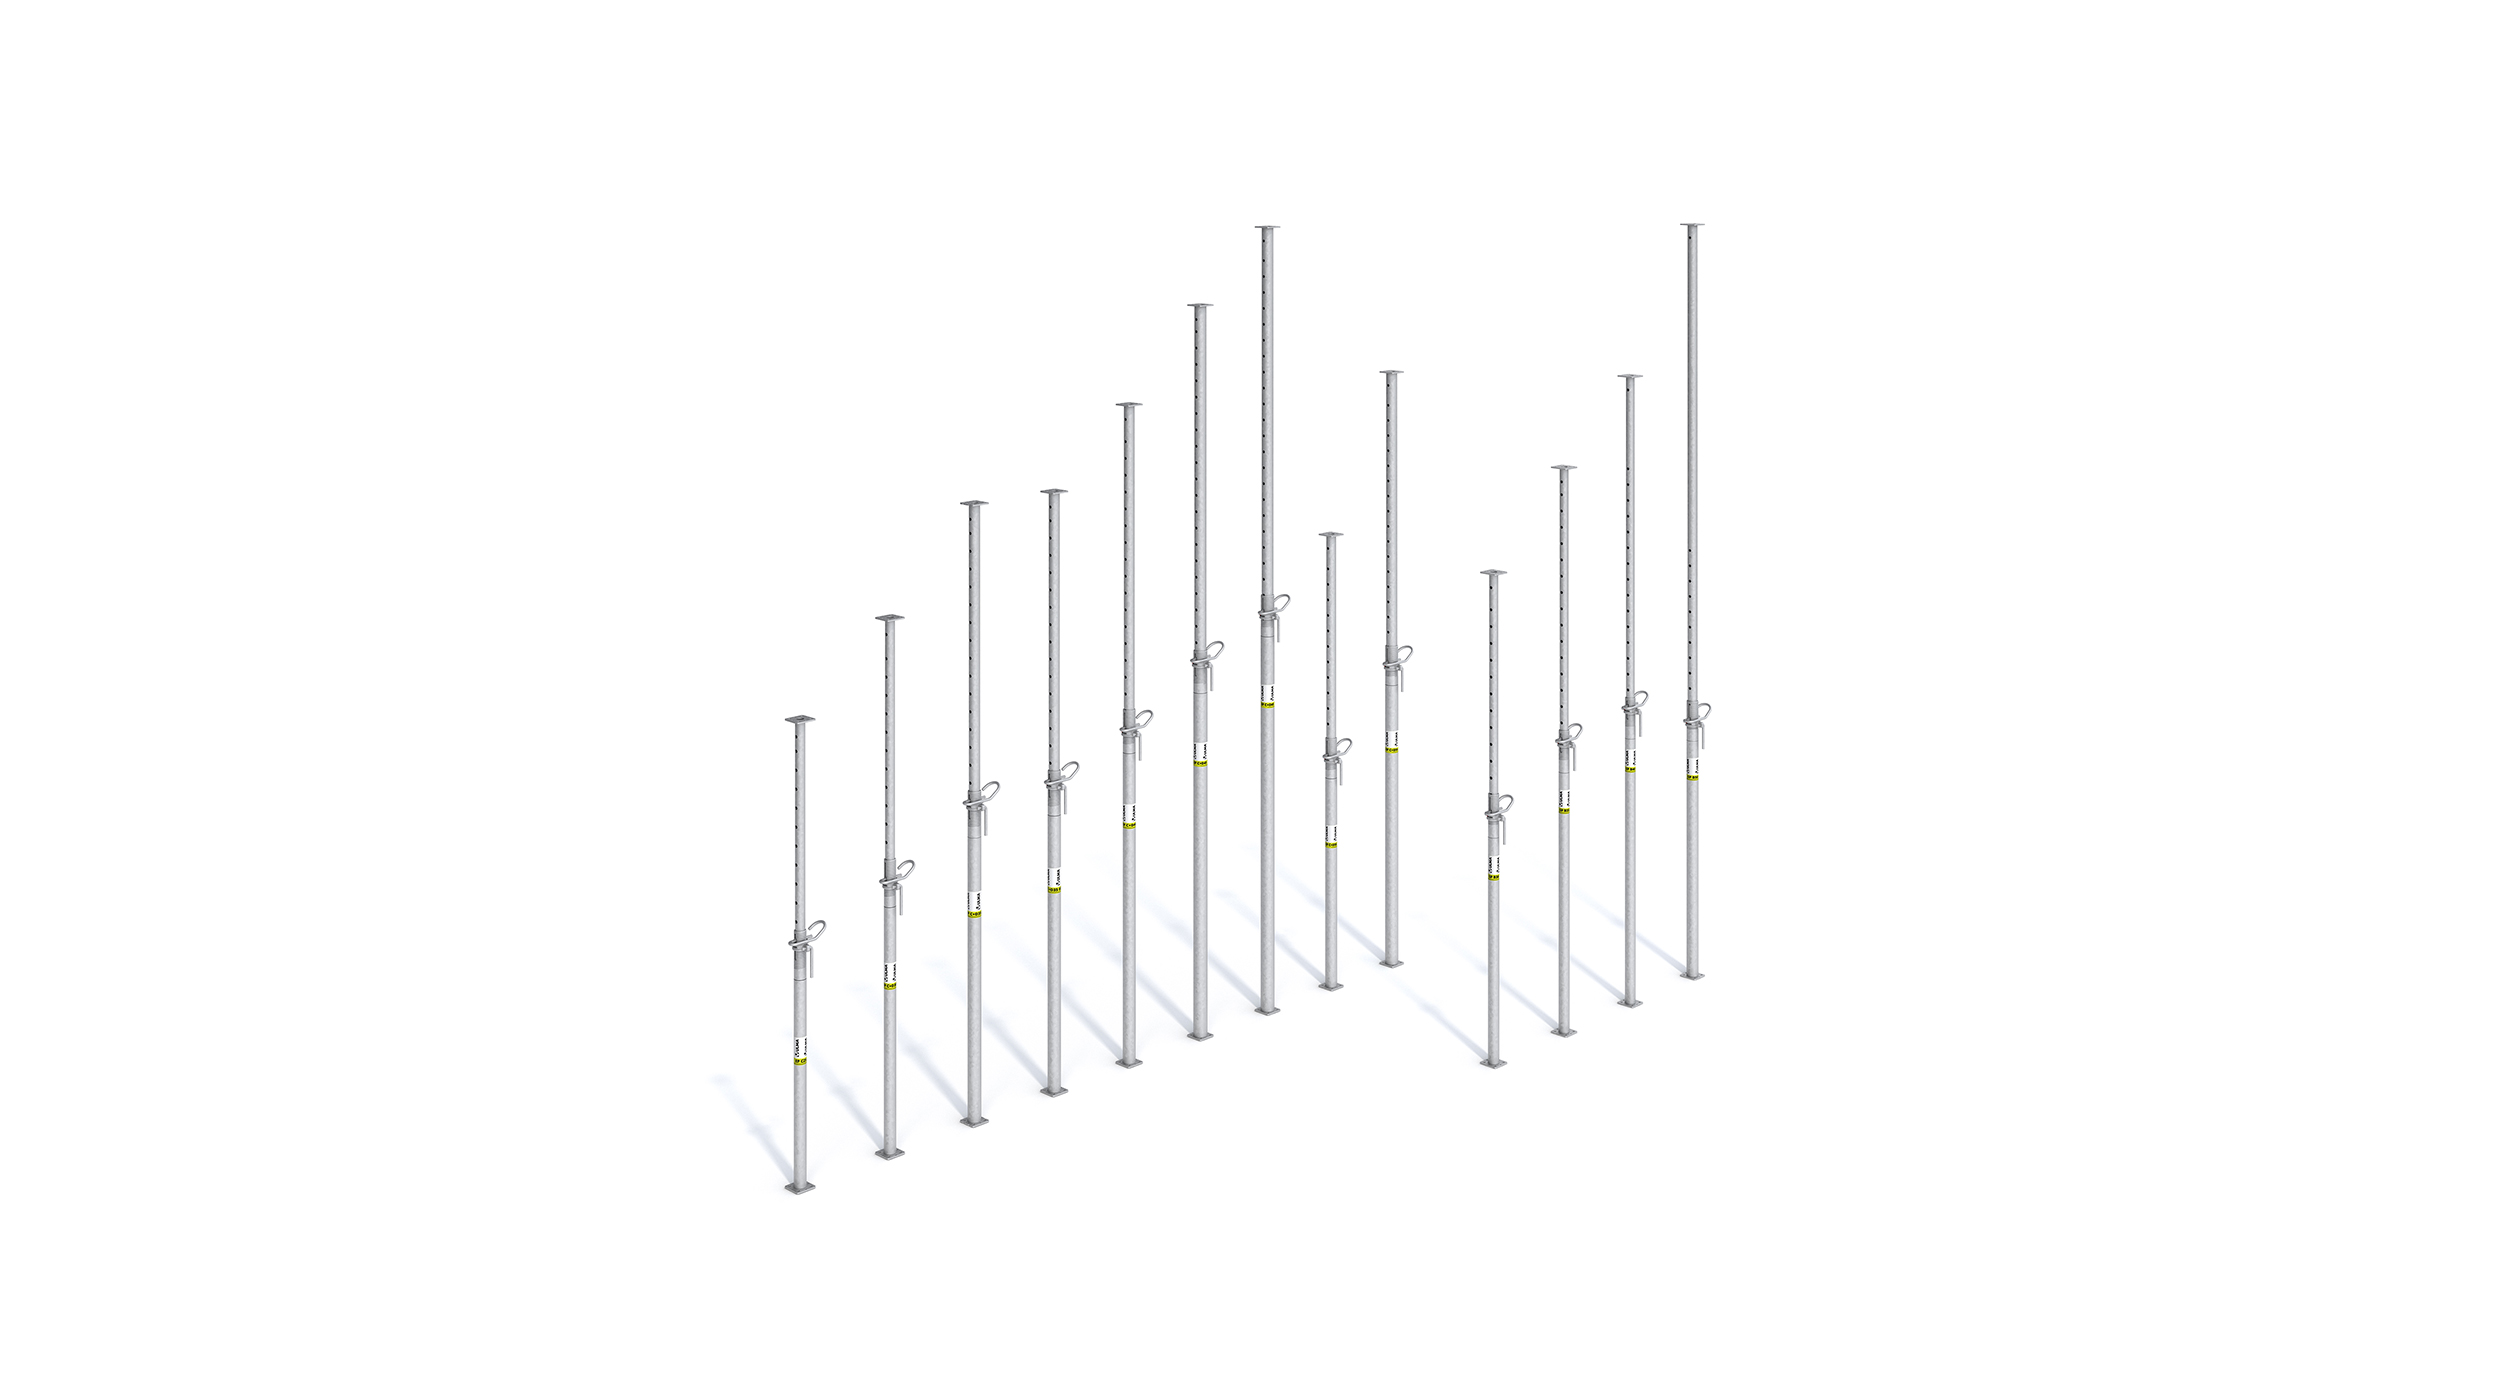 A wide selection of high load-bearing capacity steel props. Highlights: designed according to the load capacities specified in the standard EN 1065 and galvanized.